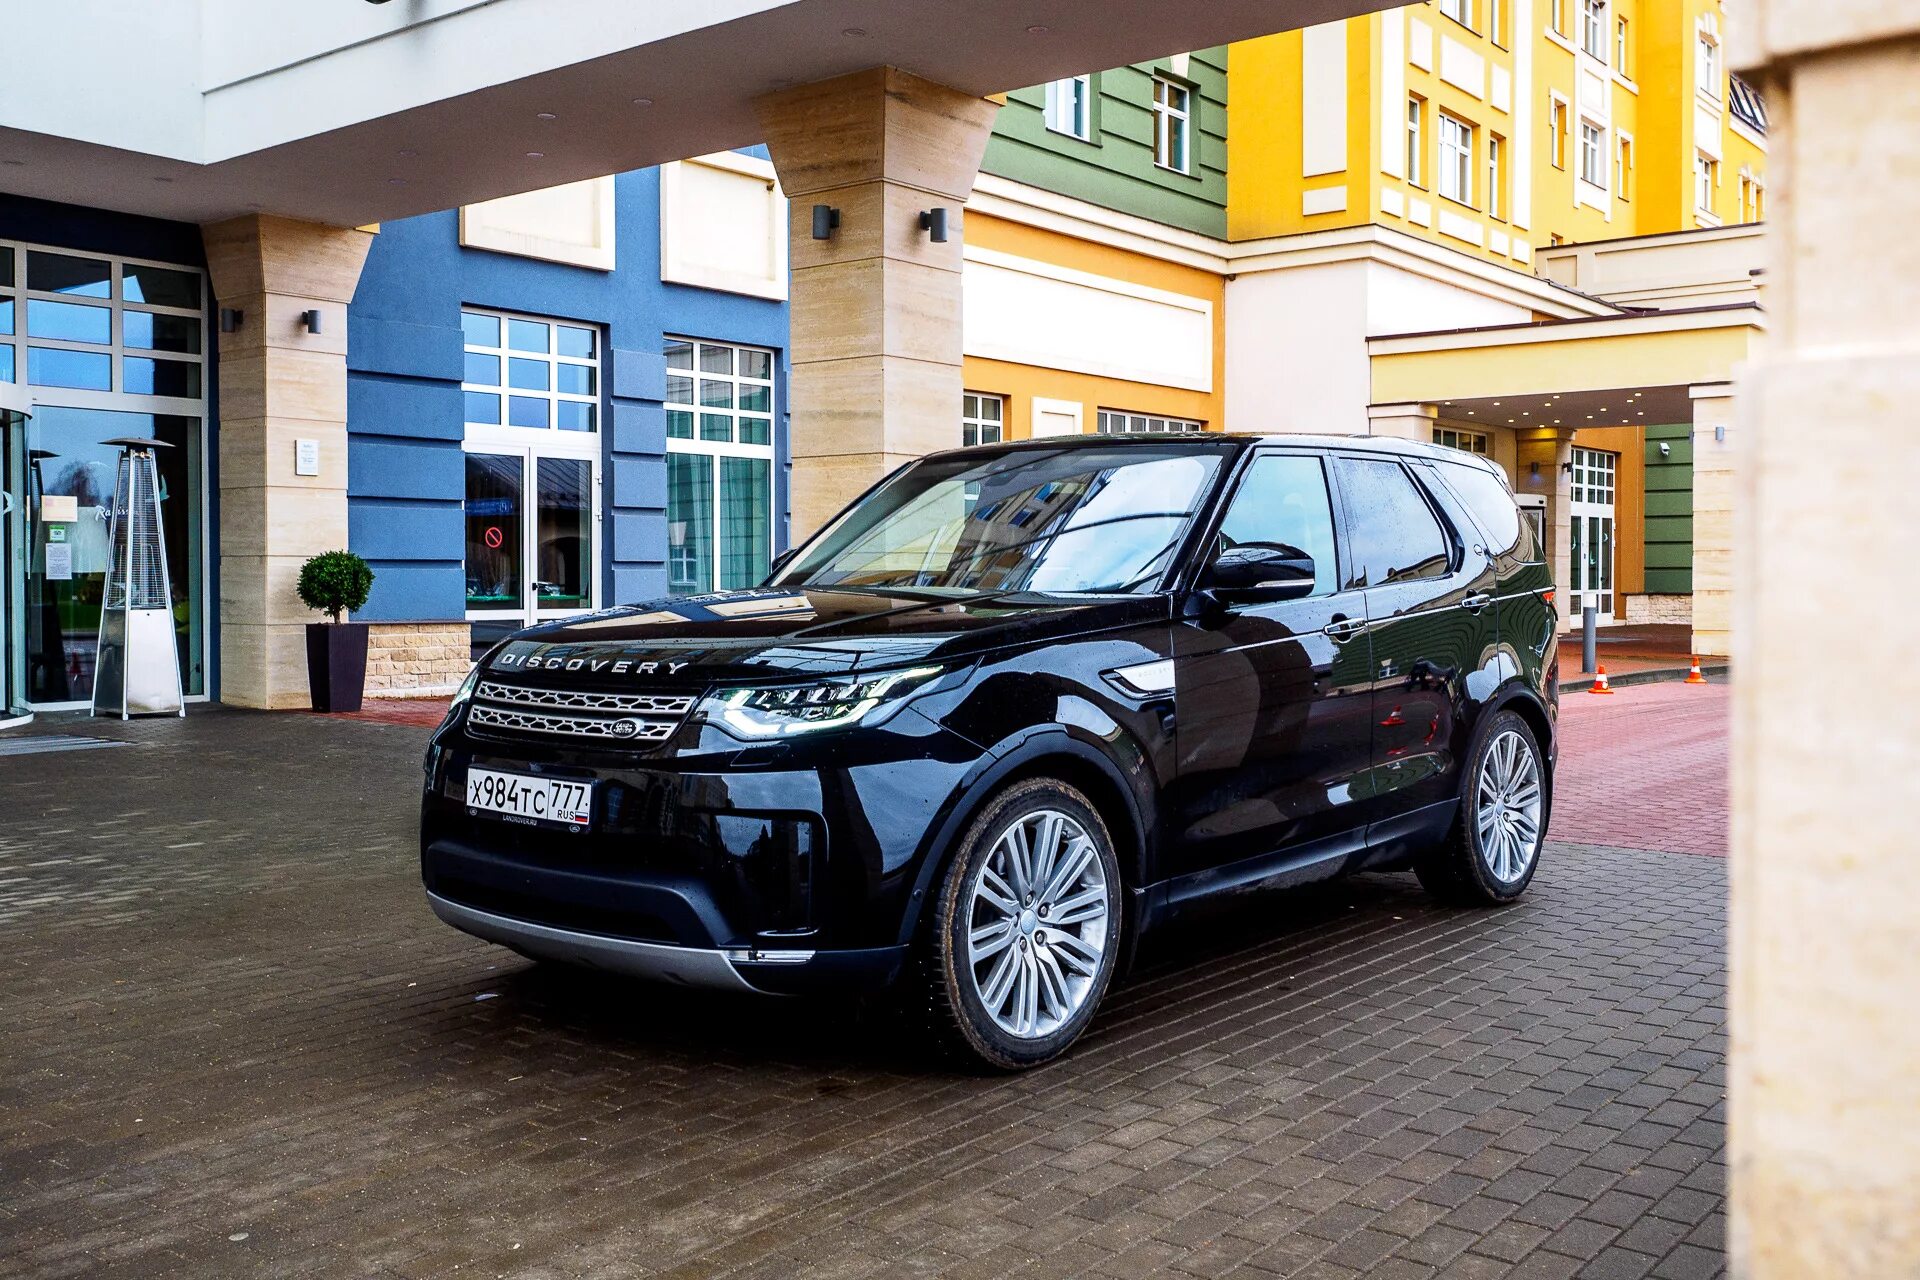 Land Rover Discovery 5. Range Rover Discovery 5. Ленд Ровер Дискавери 5 черный. Range Rover Discovery 5 2017. Форум ленд ру